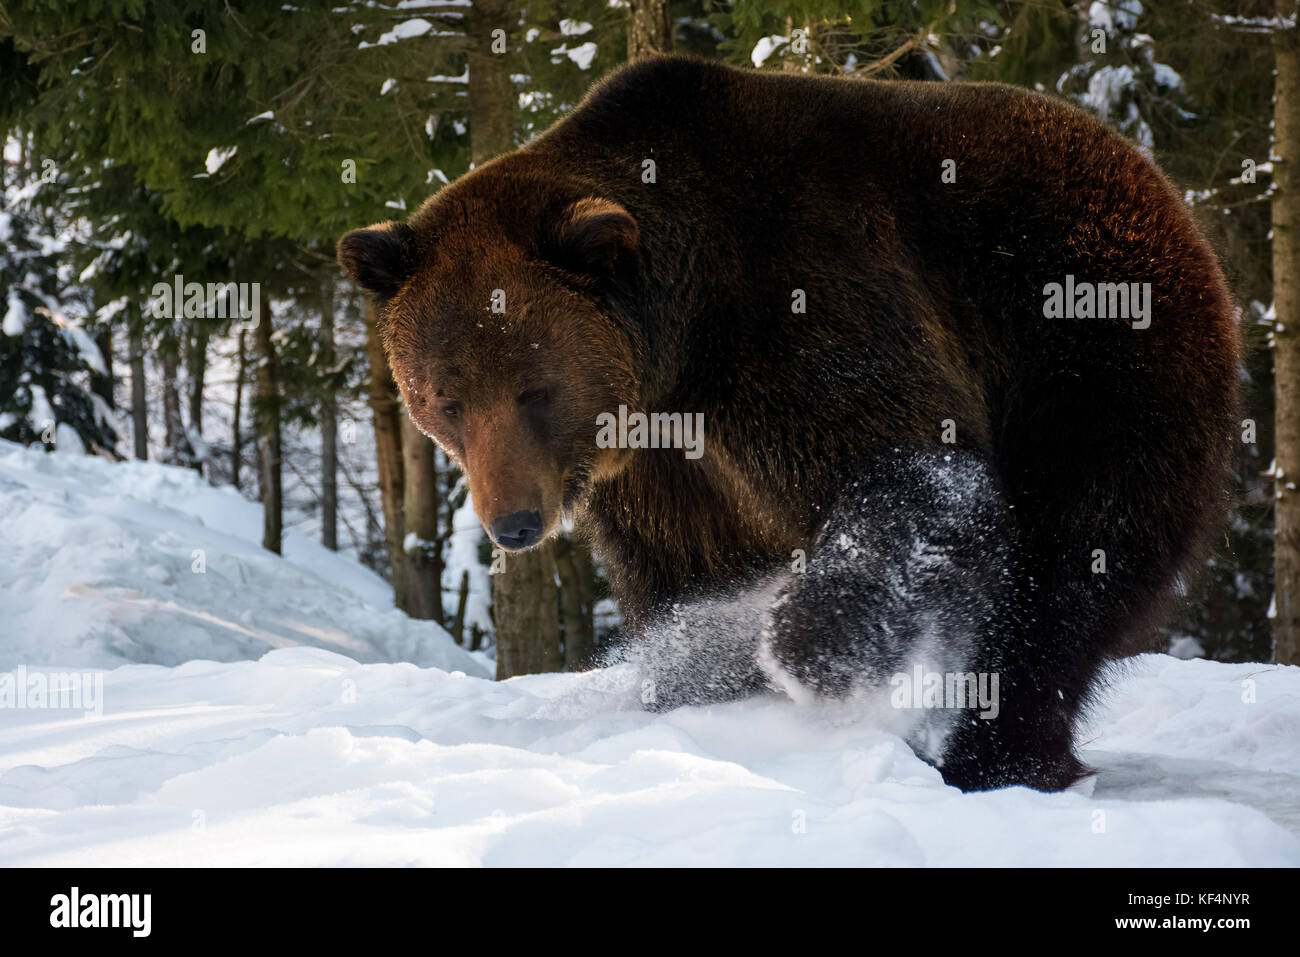 brown bear searching something in the snow. lovely wildlife scenery Stock Photo